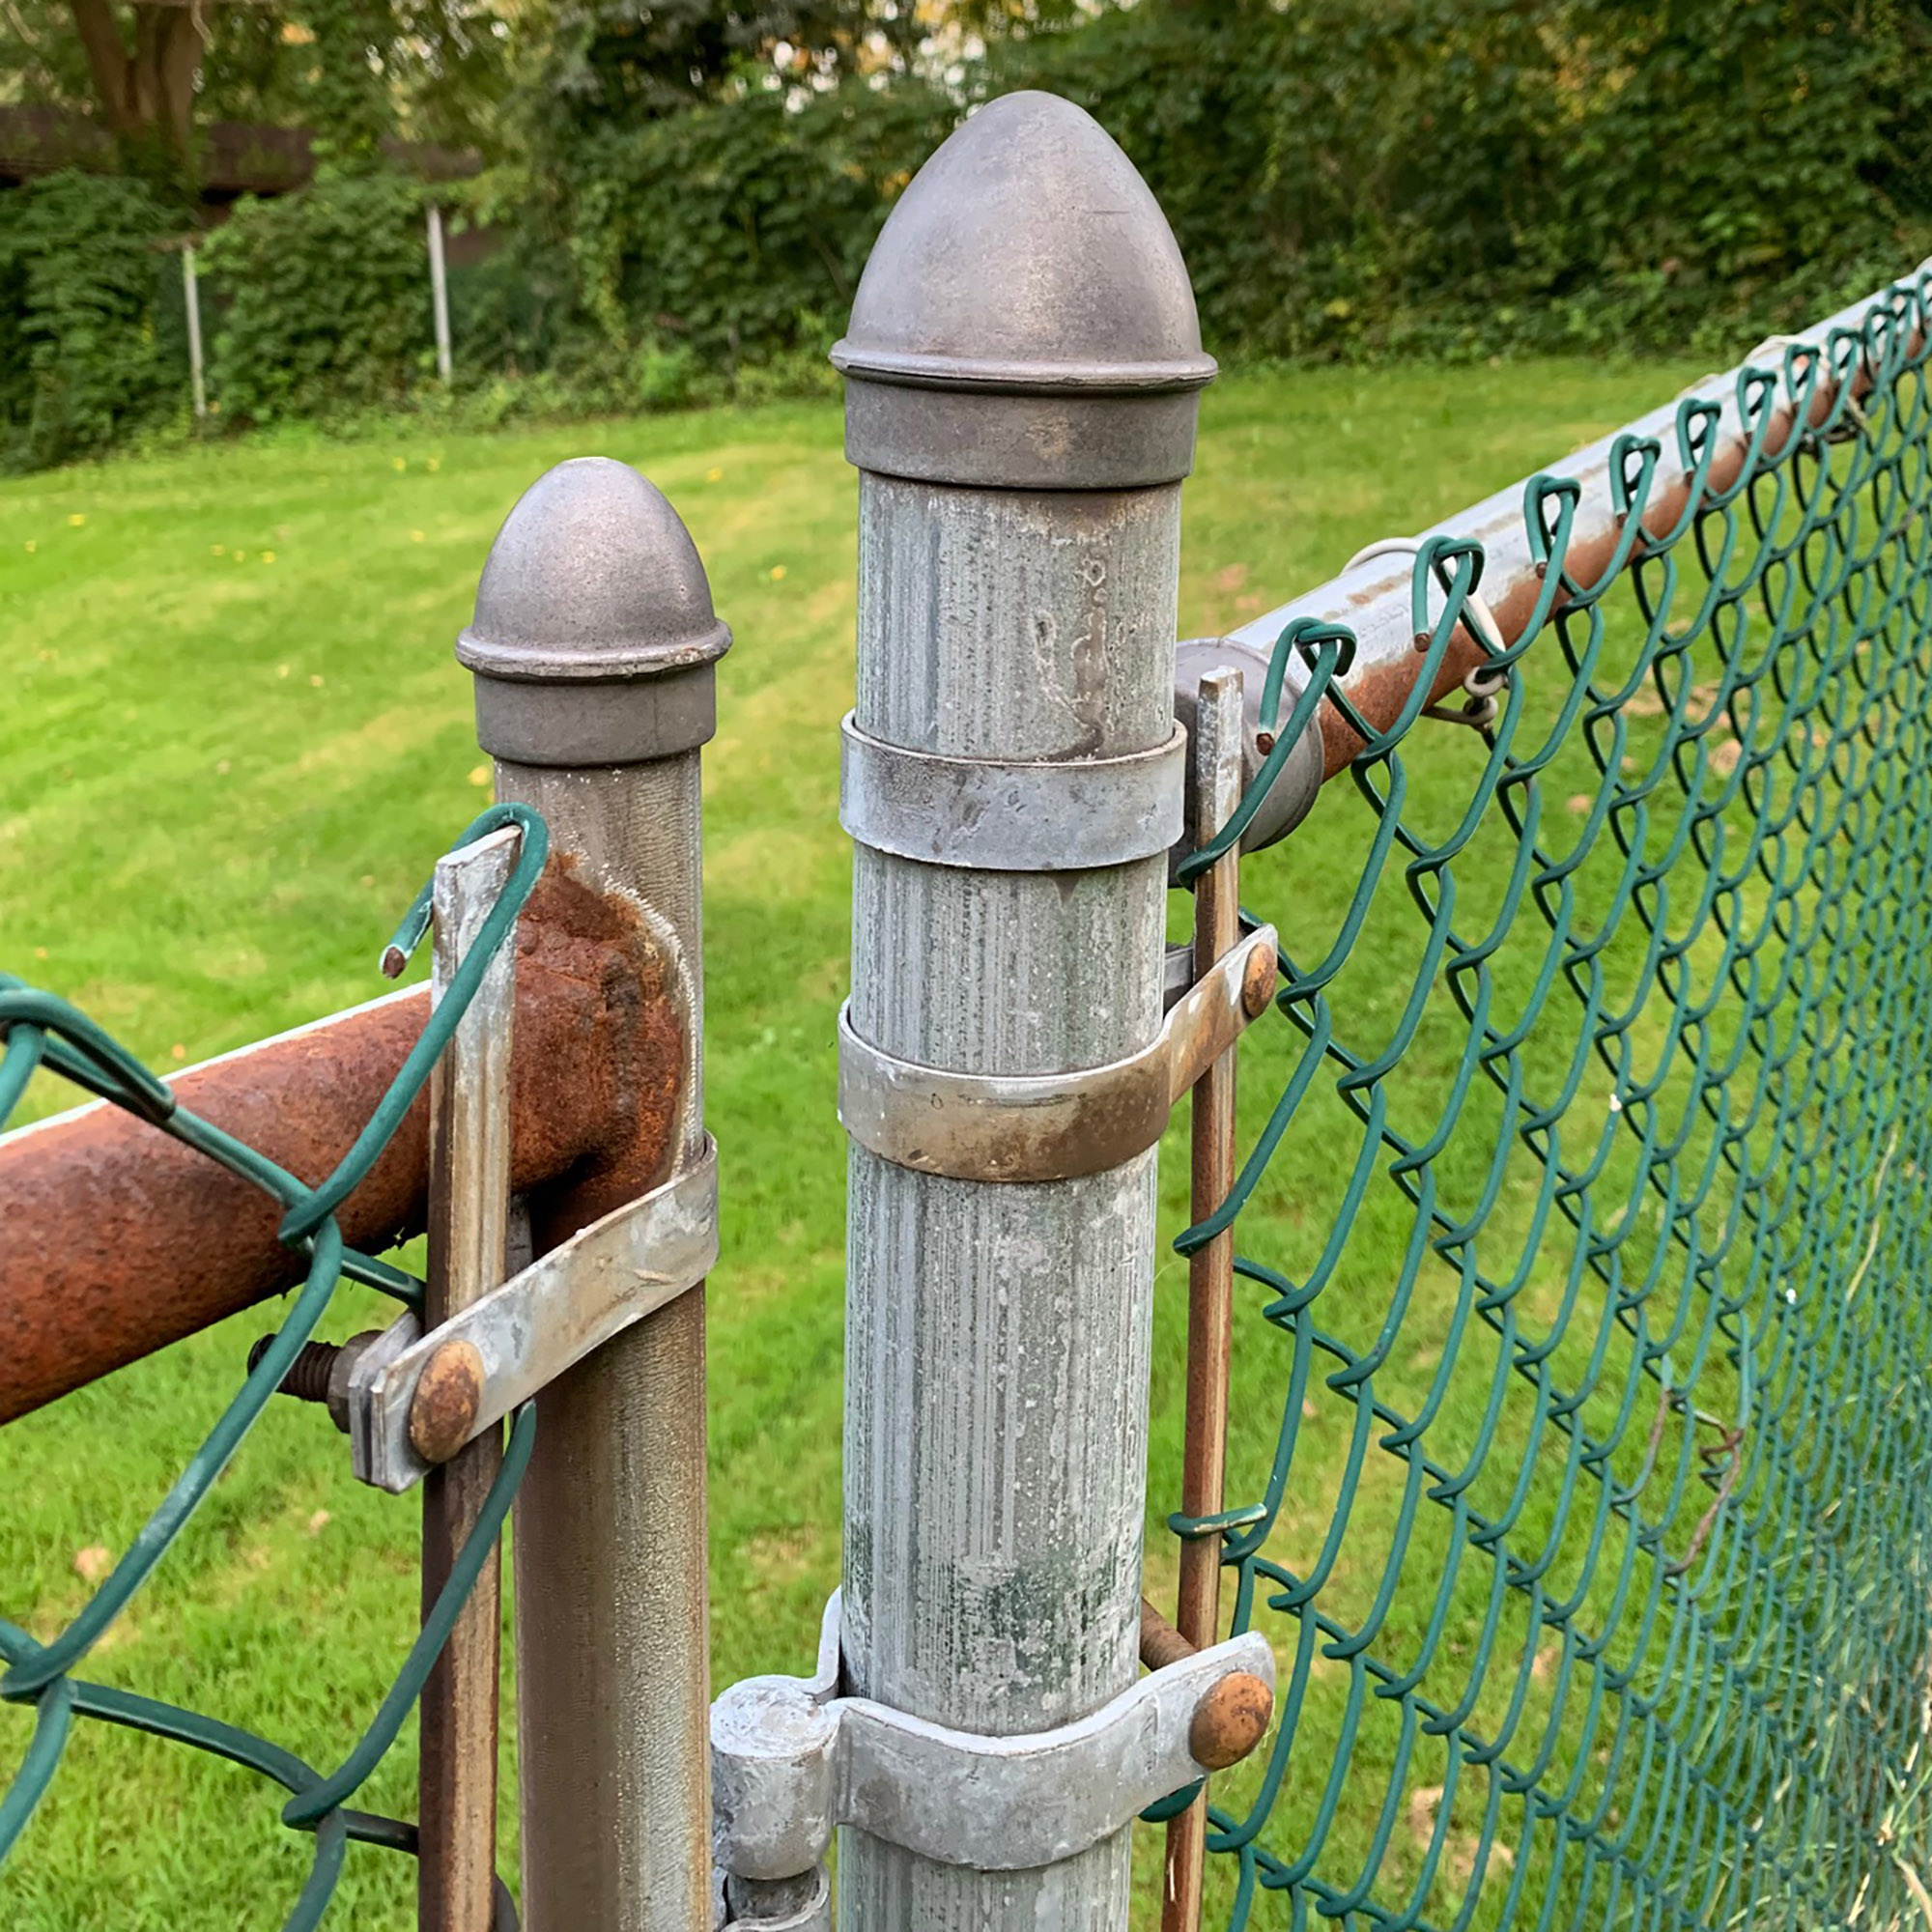 Rusty Chain Link Fence